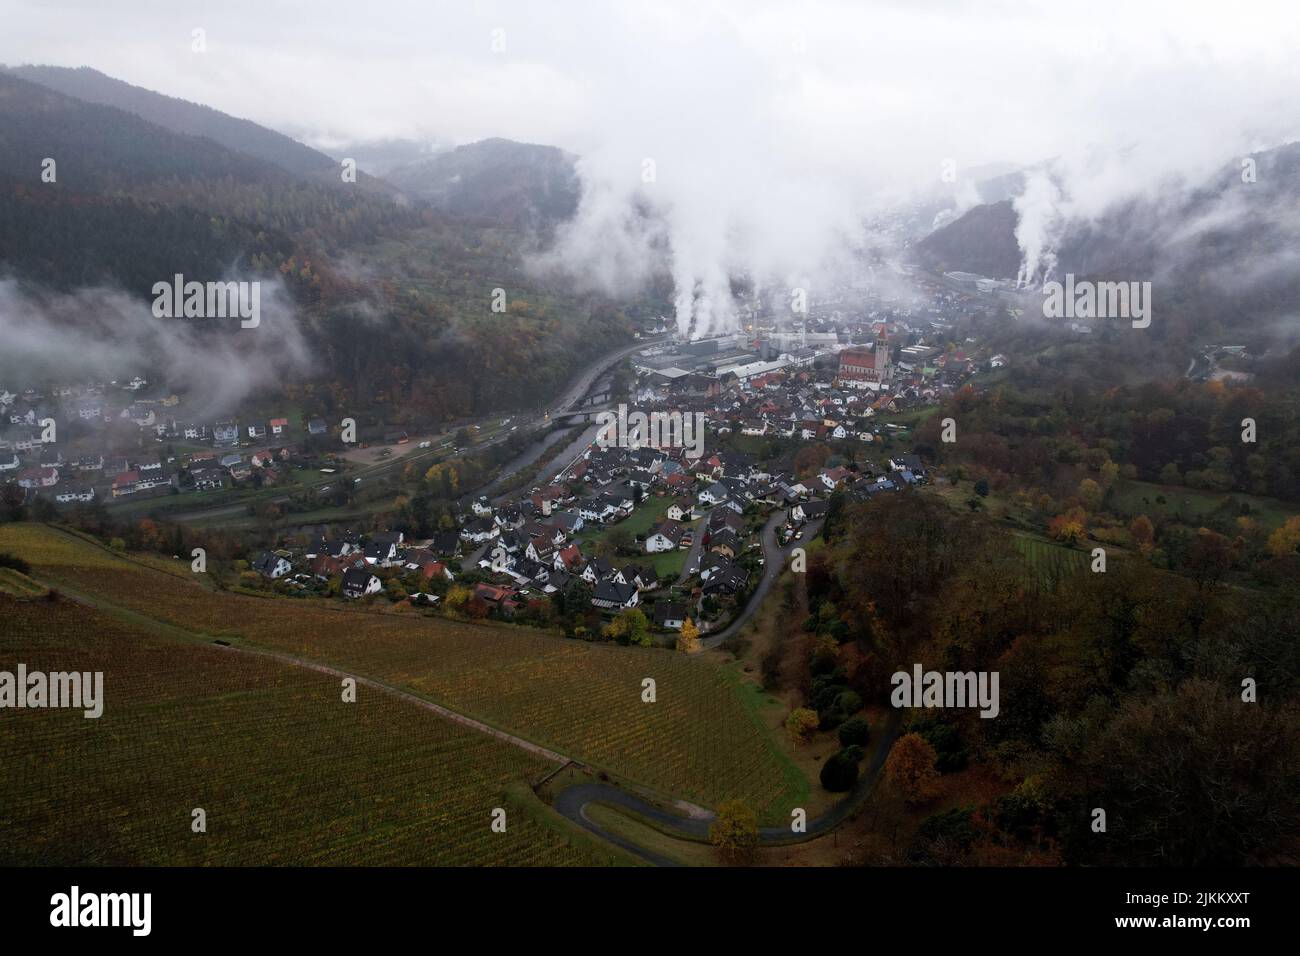 An aerial view of smoke from factory chimneys on a German valley Stock Photo